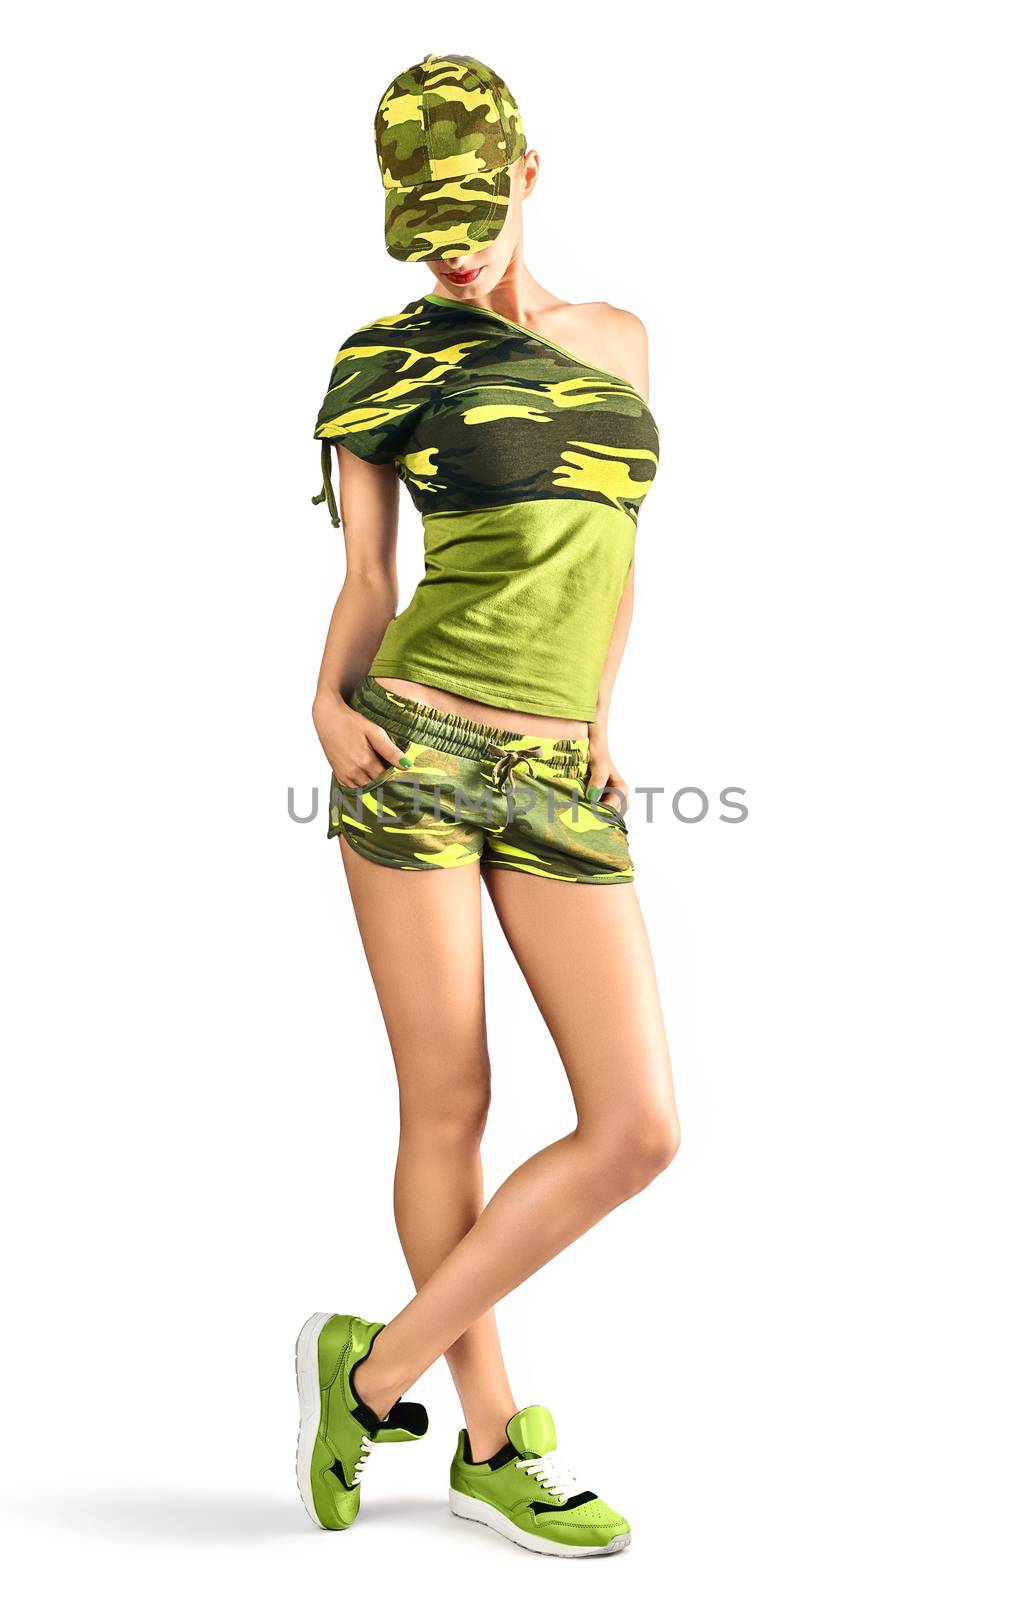 Fashion woman in camouflage clothes. Army beauty sexy military girl looking down with hands in pockets. Stylish playful people, unusual khaki green look, isolated on white. Attractive blond creative 